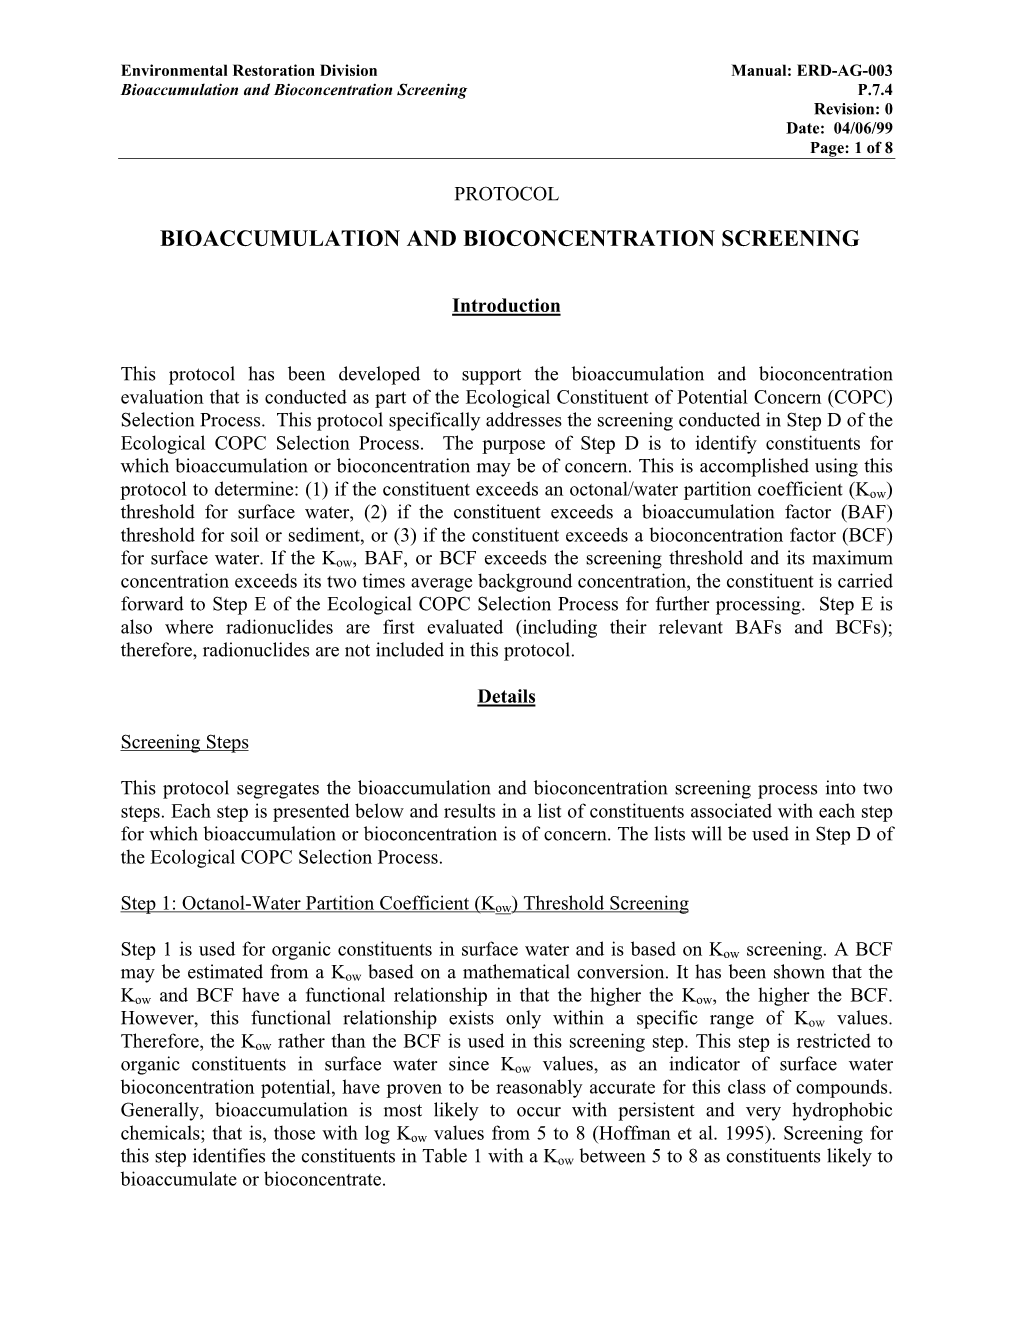 Bioaccumulation and Bioconcentration Screening P.7.4 Revision: 0 Date: 04/06/99 Page: 1 of 8